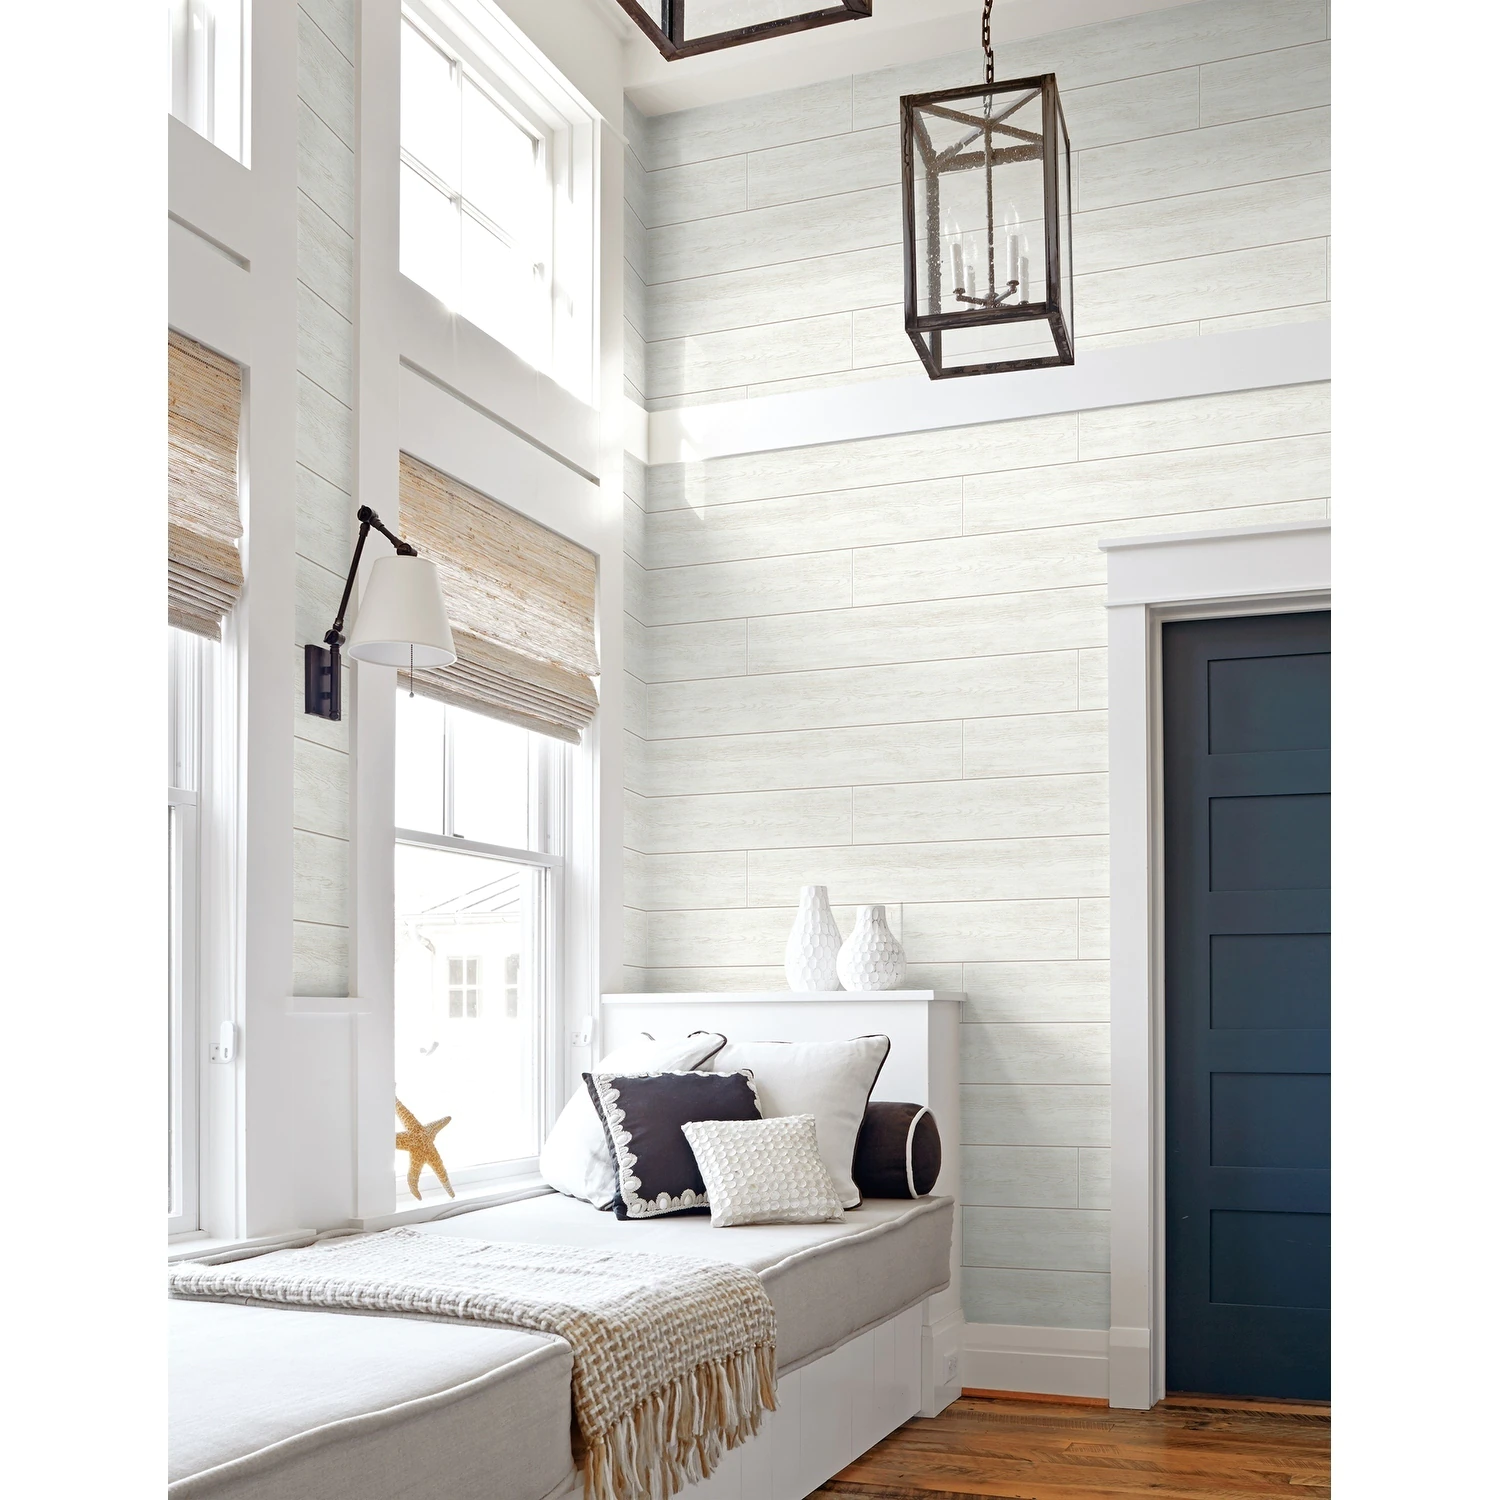 Get the Look of Shiplap for Cheap